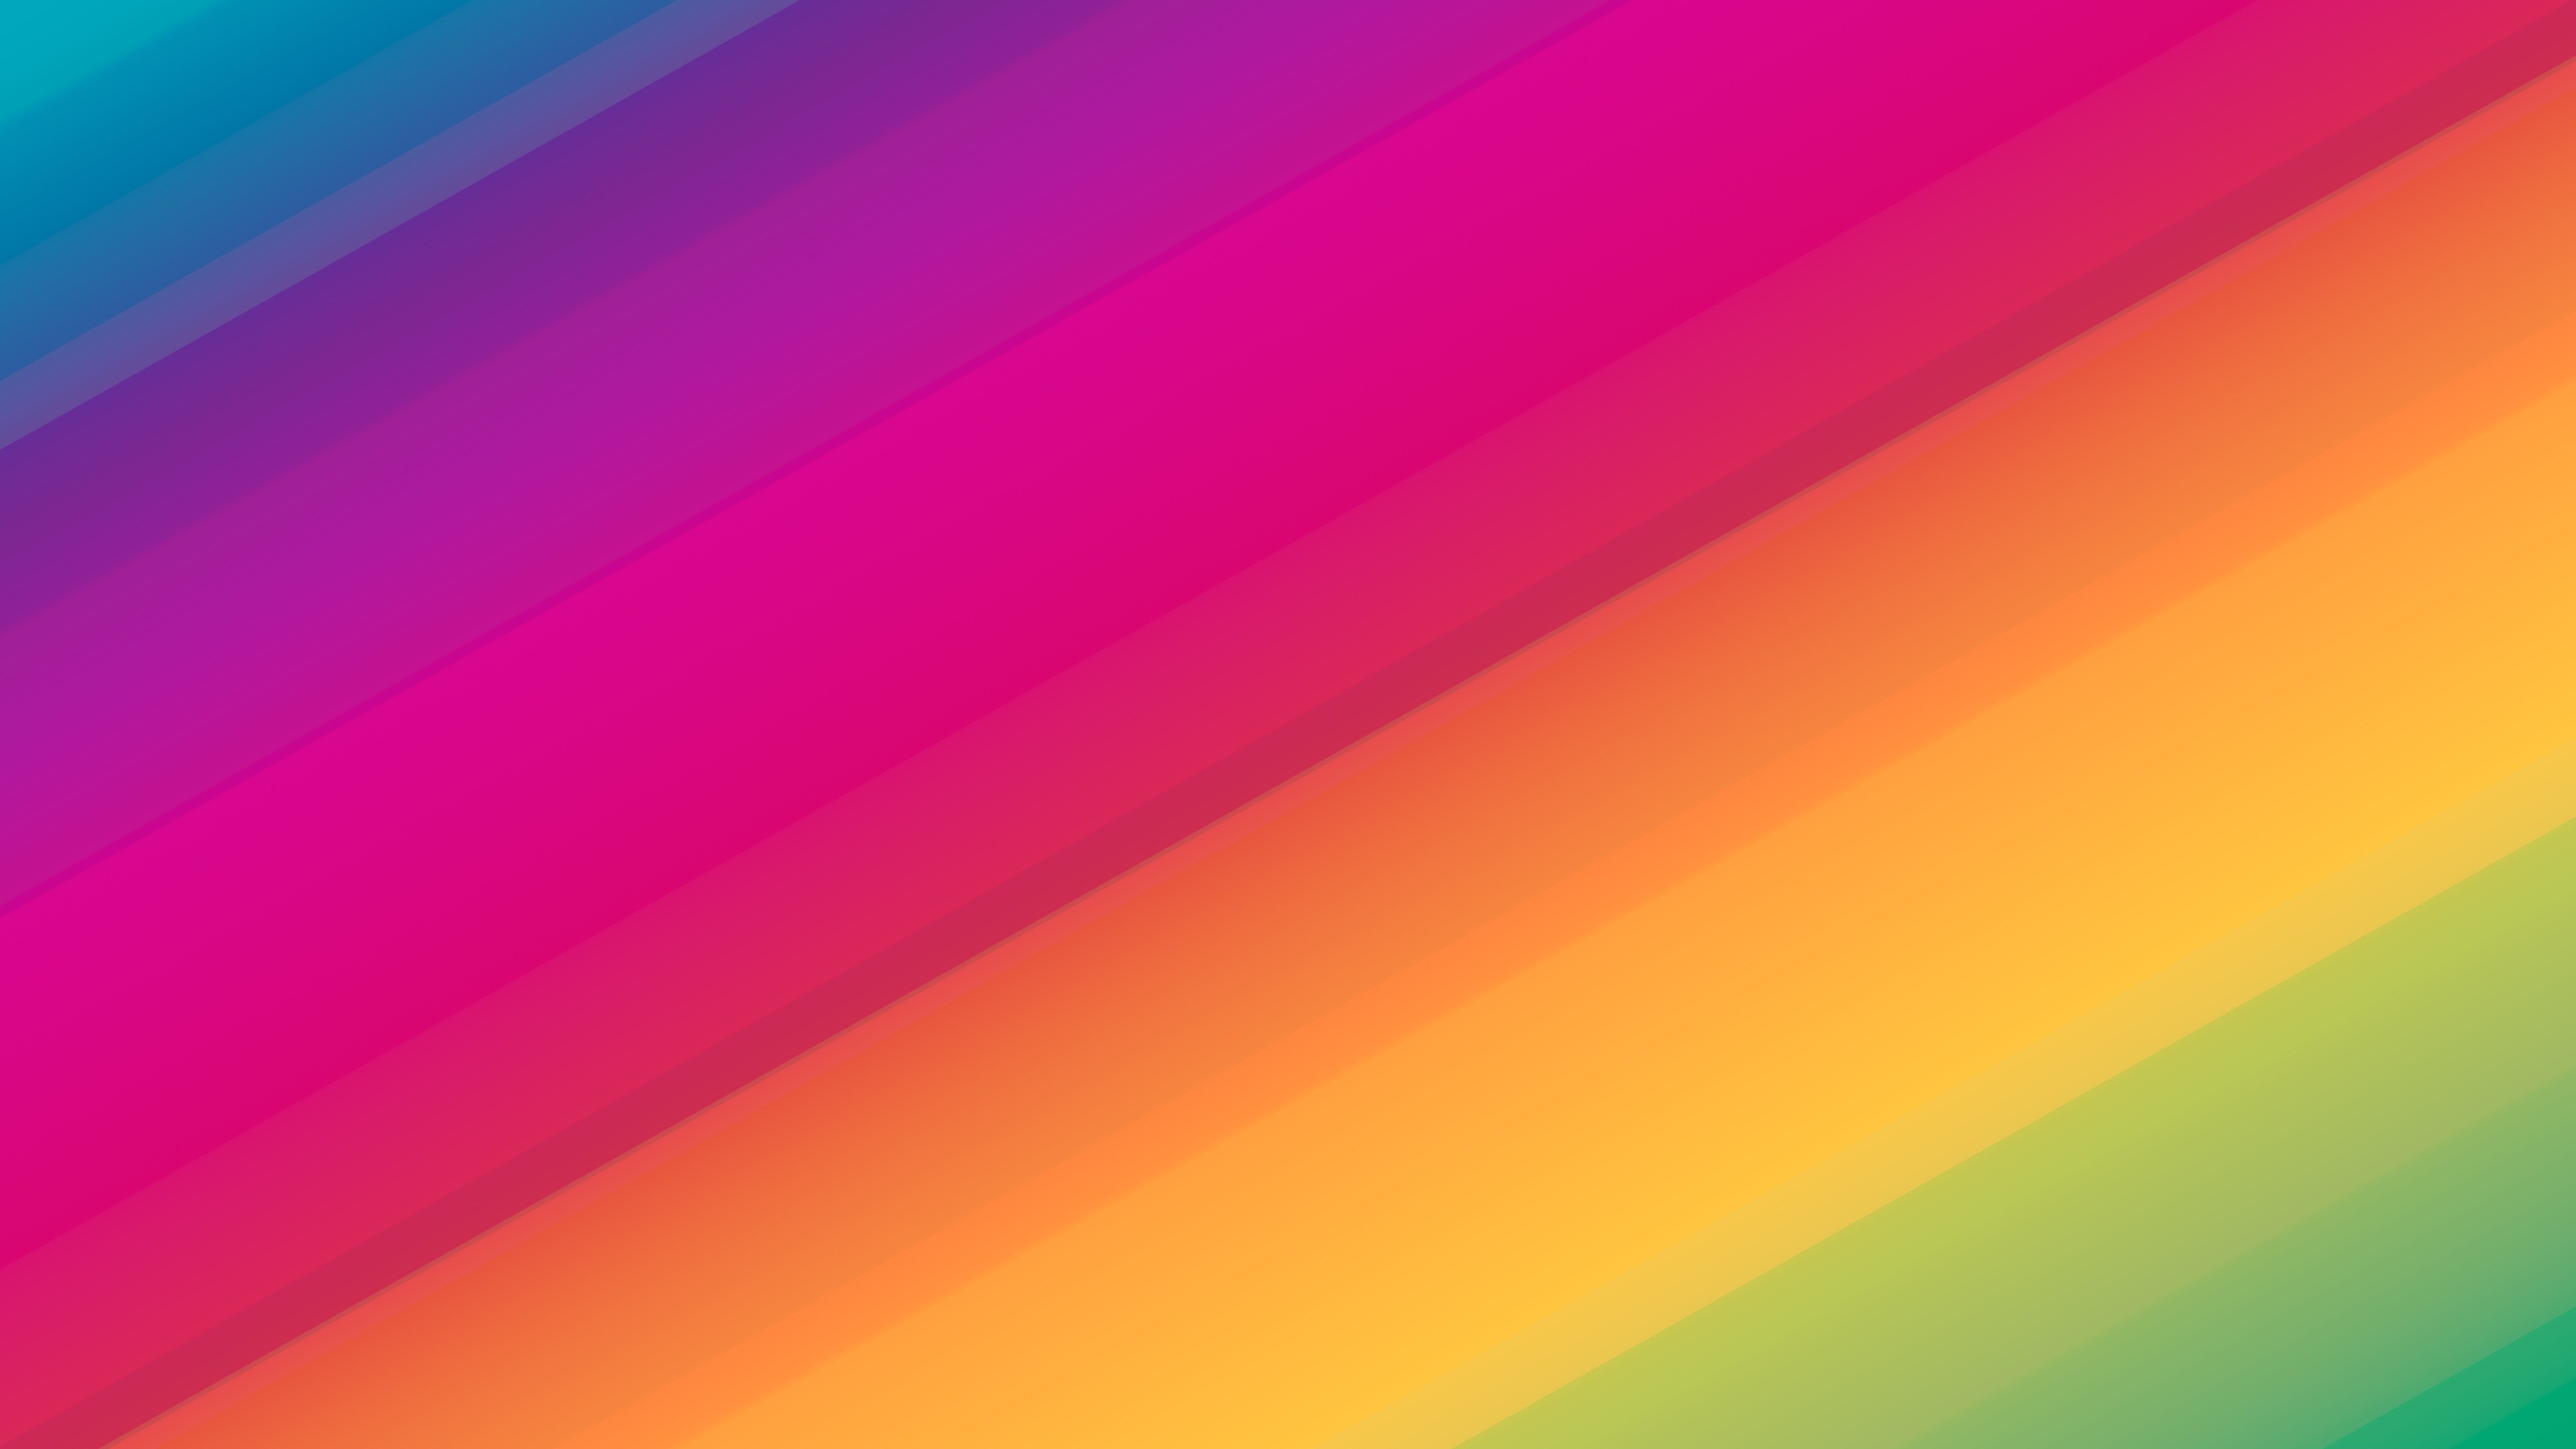 Abstract Diagonal Lines Colorful 3840x2160